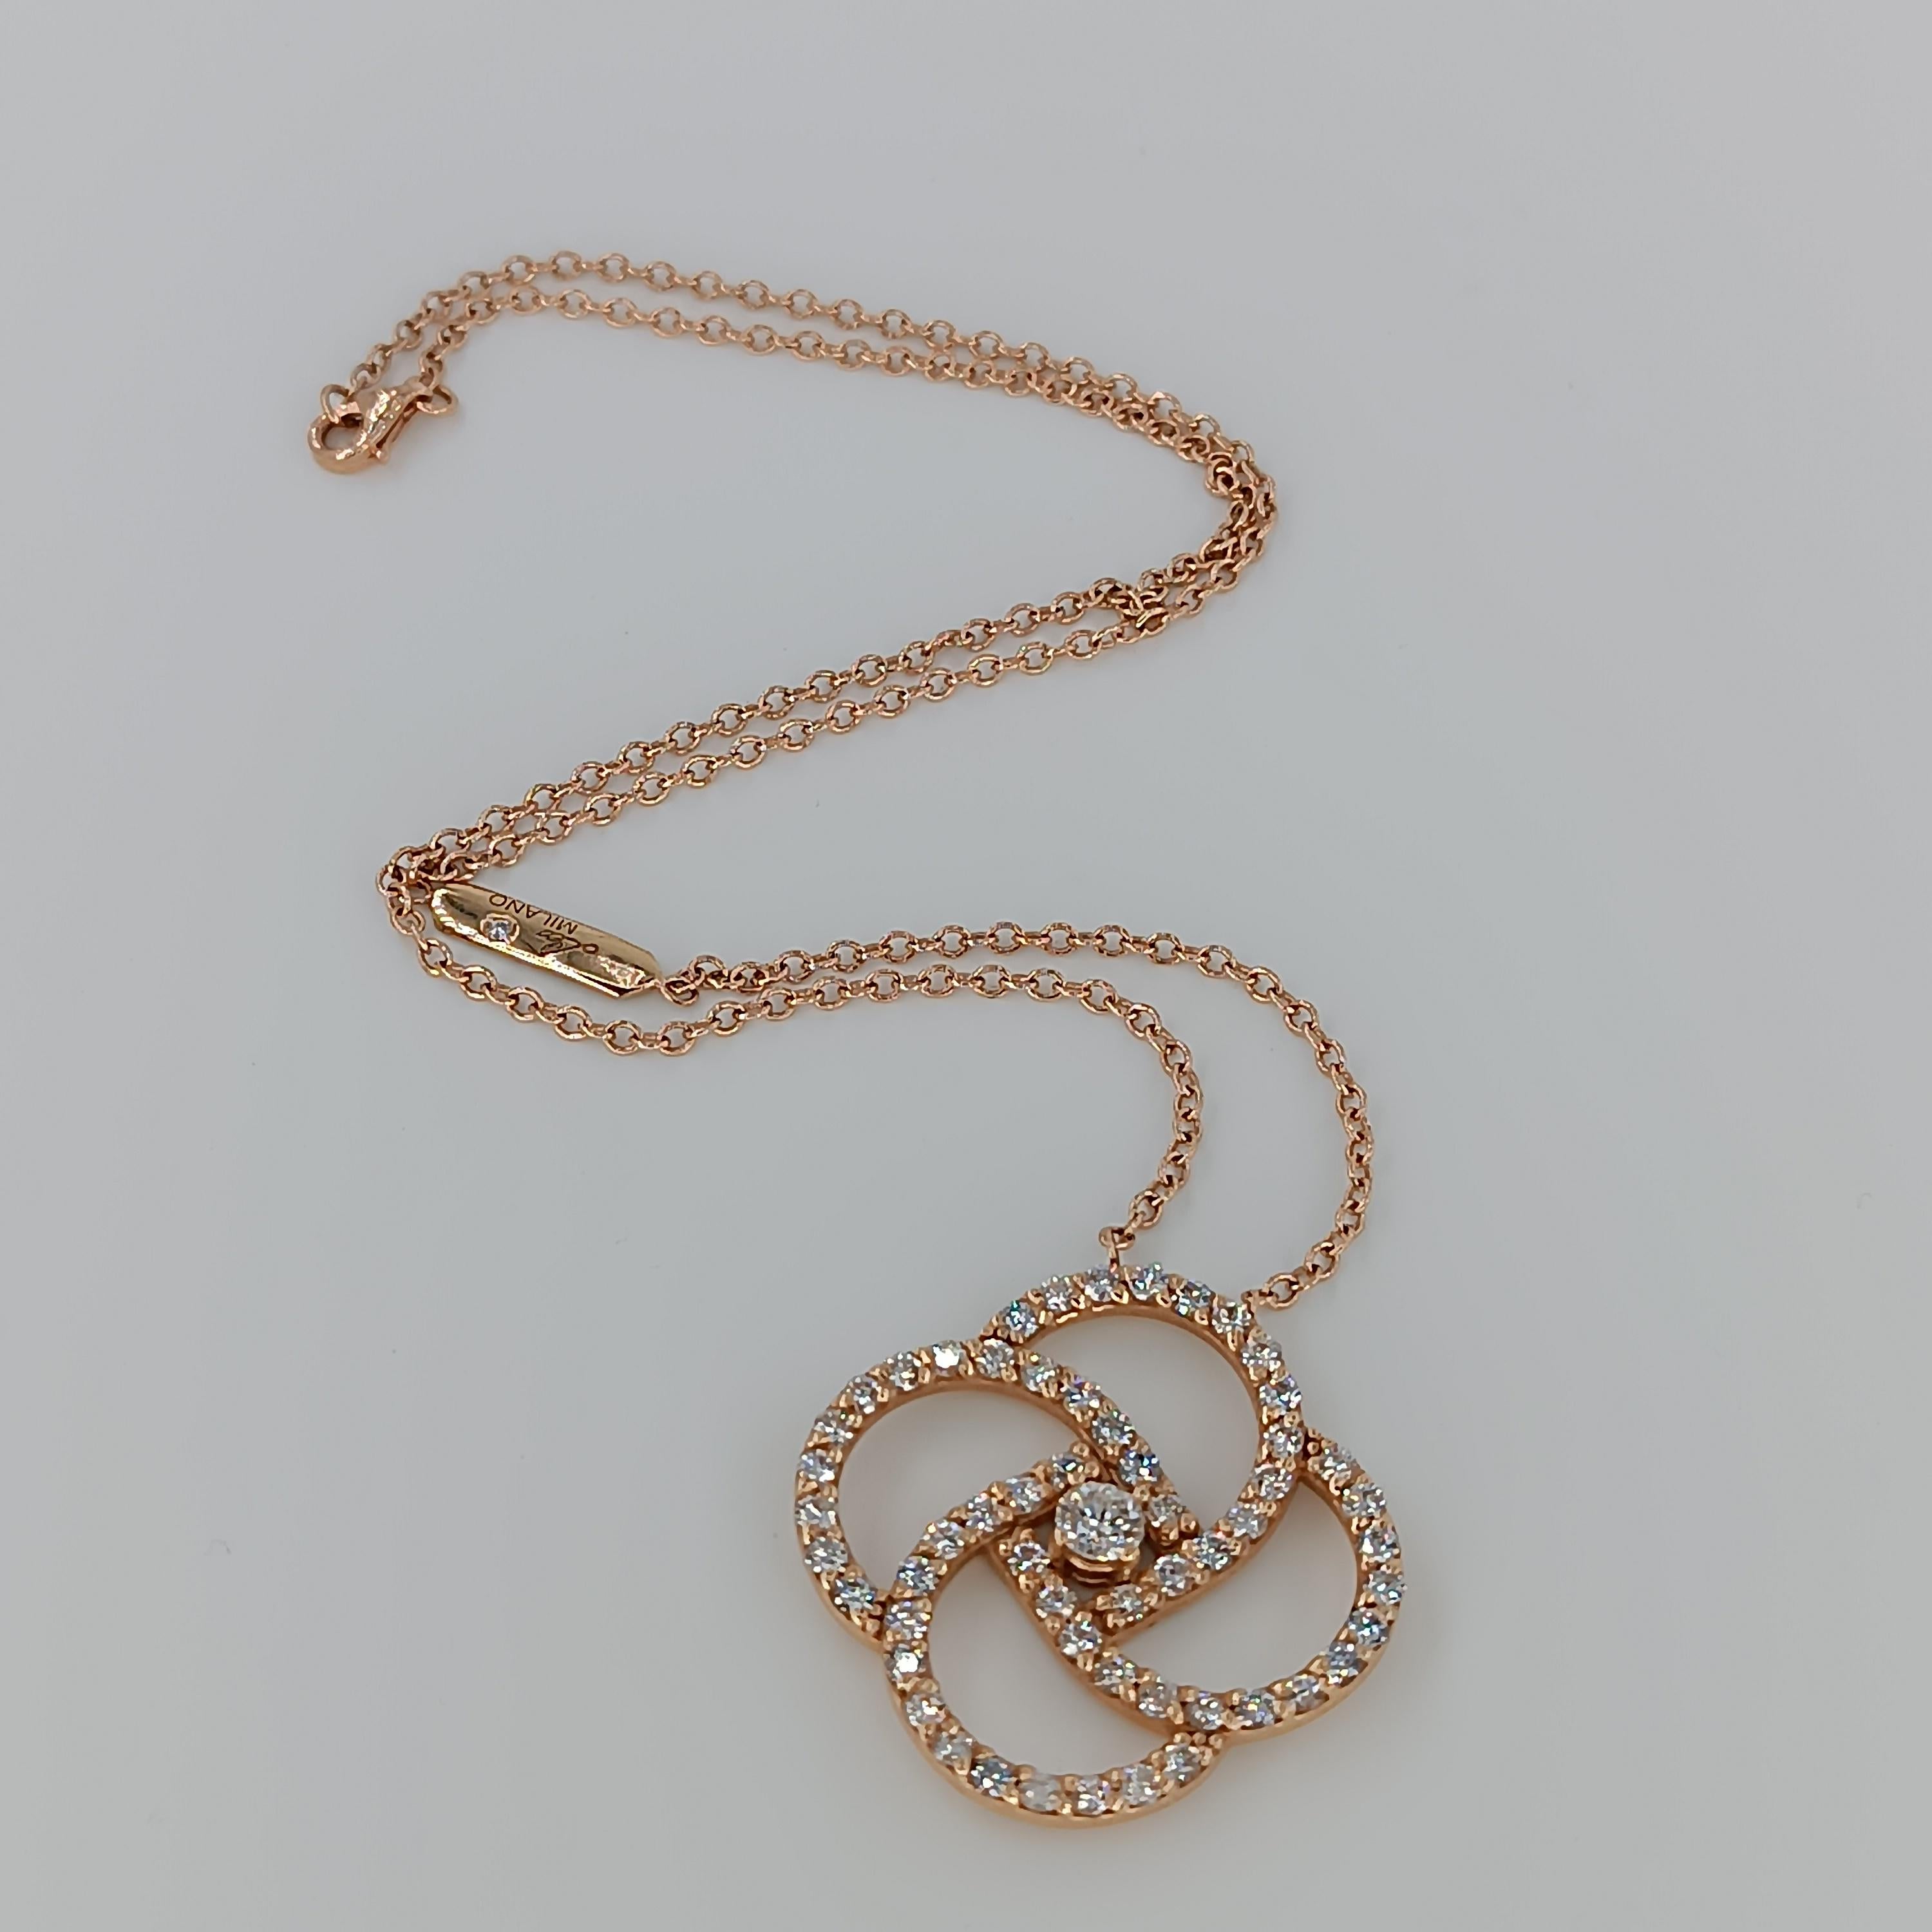 This beautiful pendant made of 18 carat Rose gold for 9.86 grams boasts a central Diamond of 0.25 carat and 56 VS G color diamonds for a total of 1.93 carats. 
any item of our jewelry collection has a dedicated identification number lasered on the